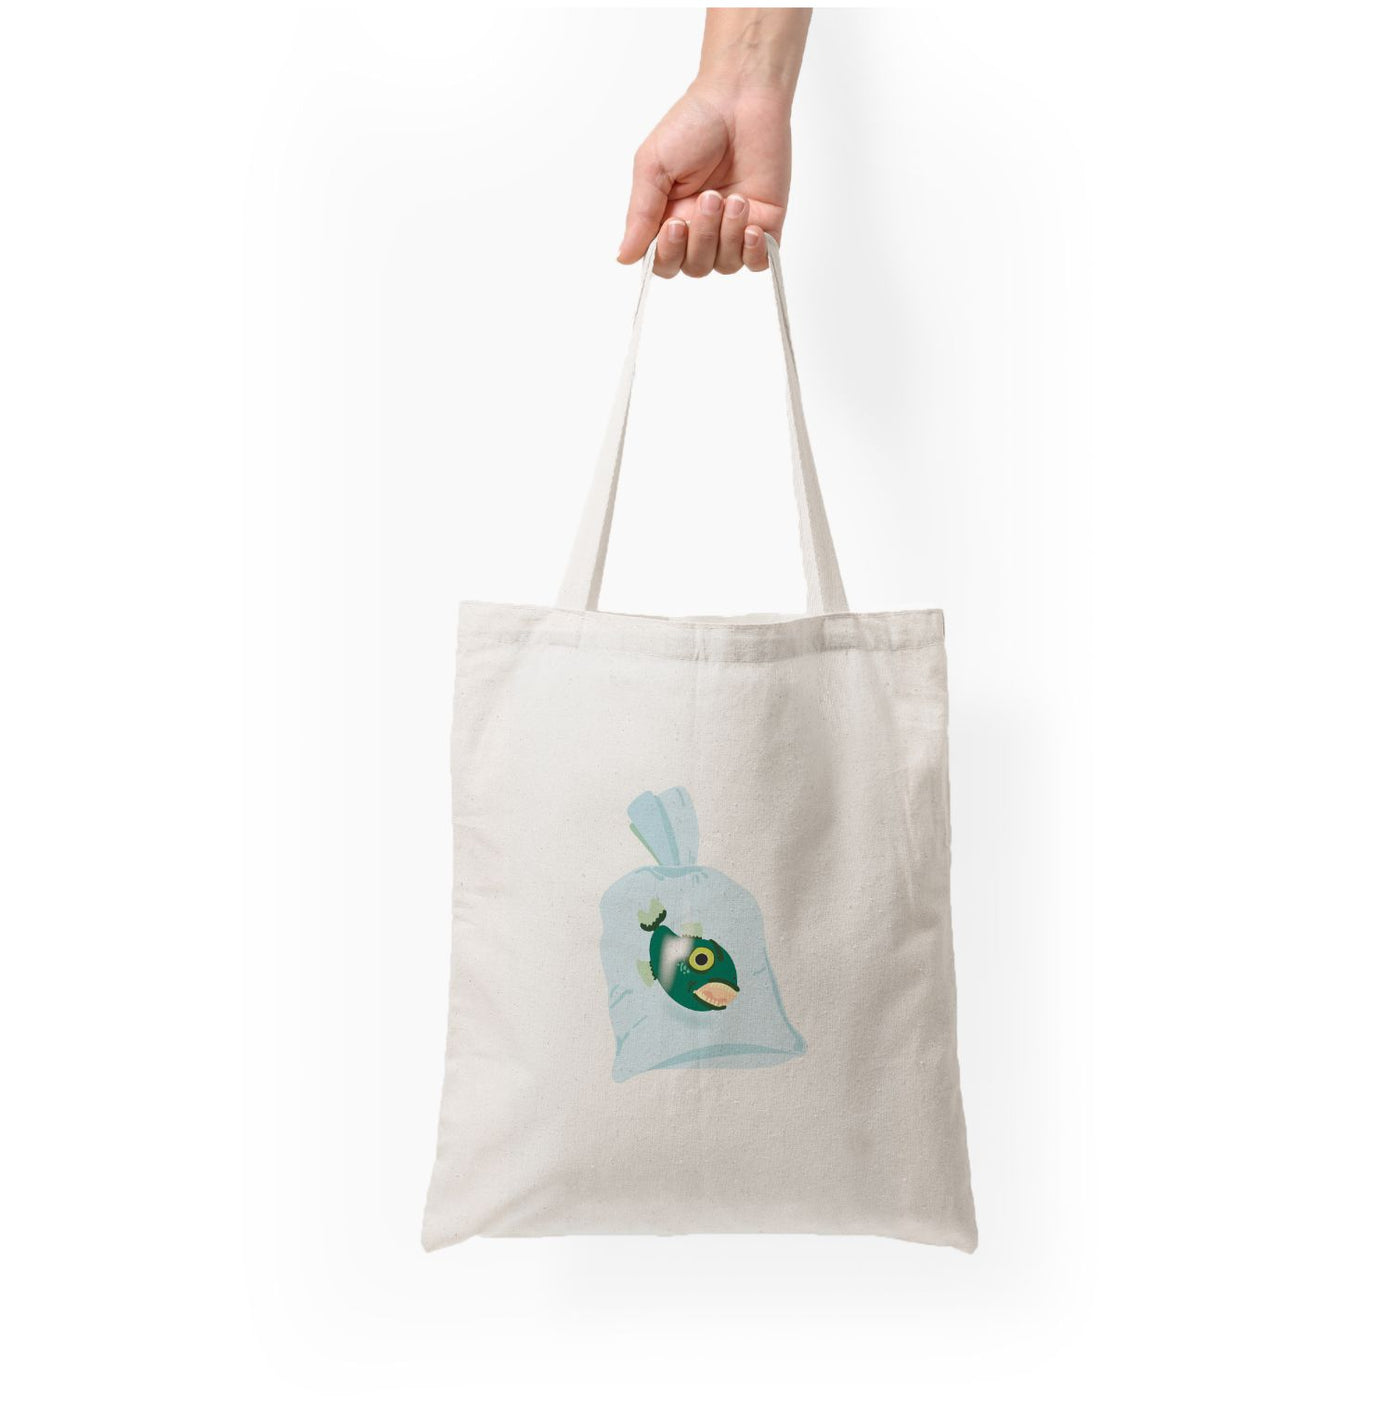 Fish In A Bag - Wednesday Tote Bag